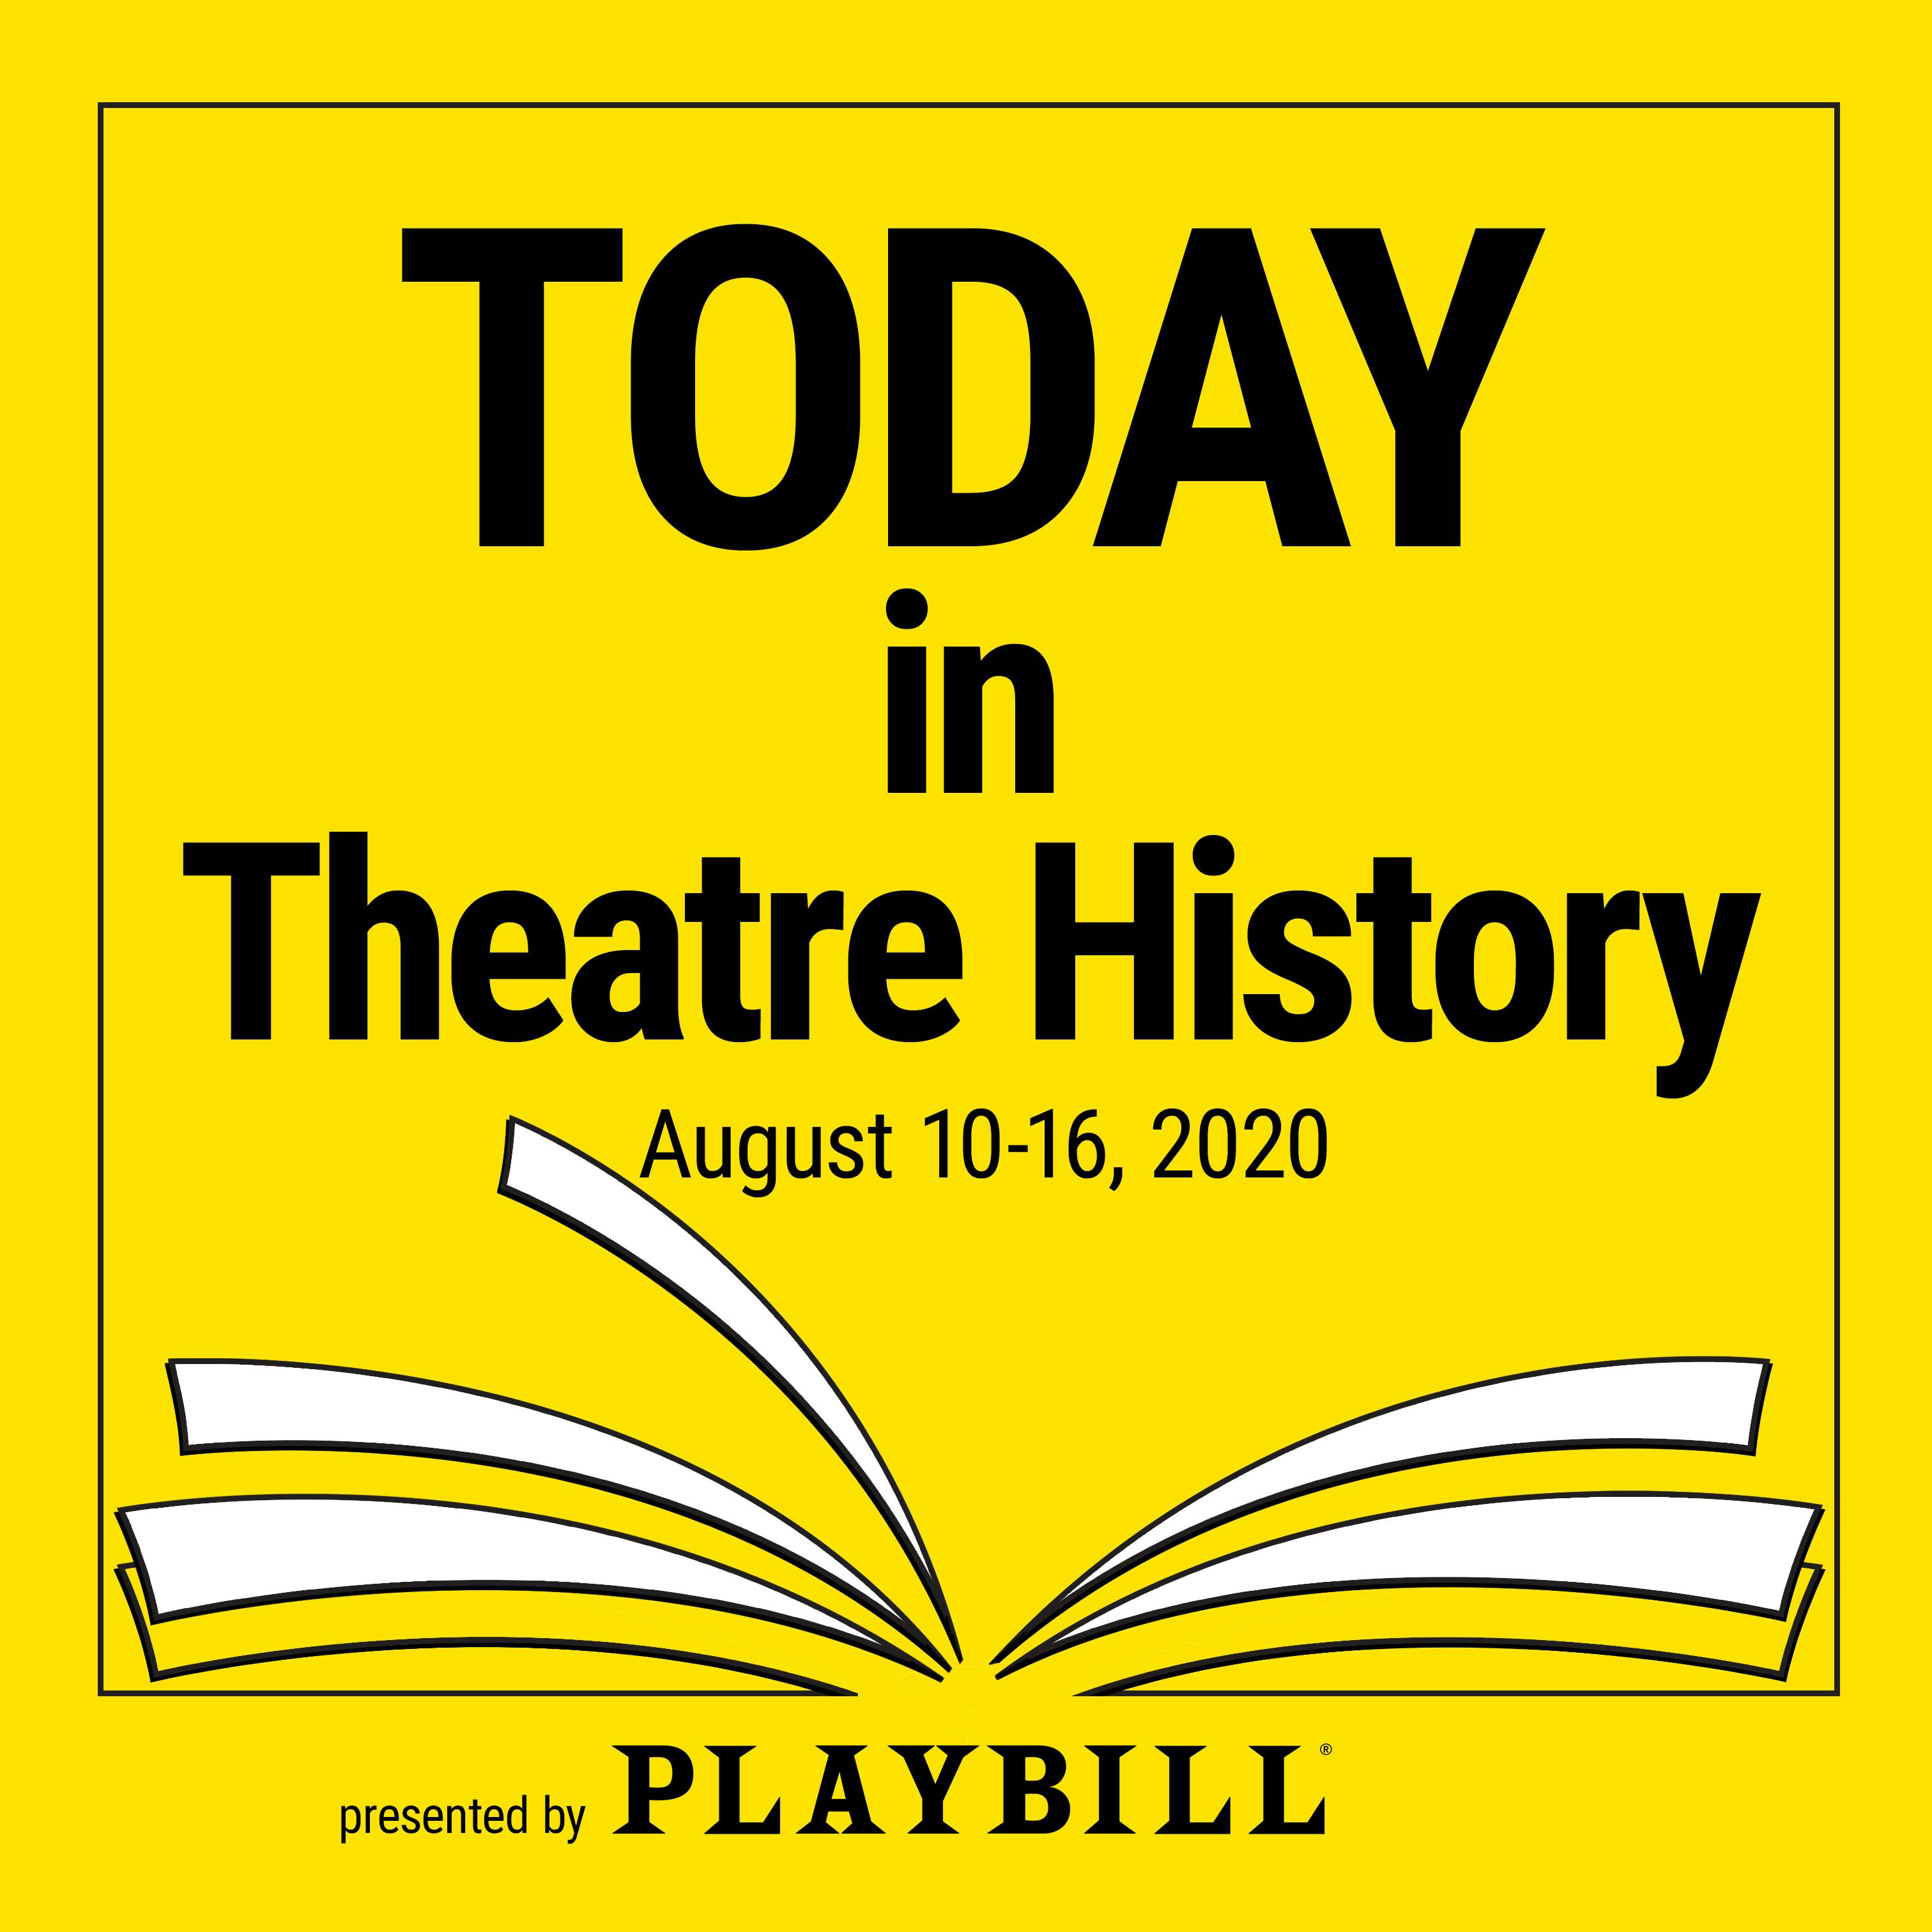 August 10–16, 2020: Hairspray and Pretty Woman both opened on Broadway this week.